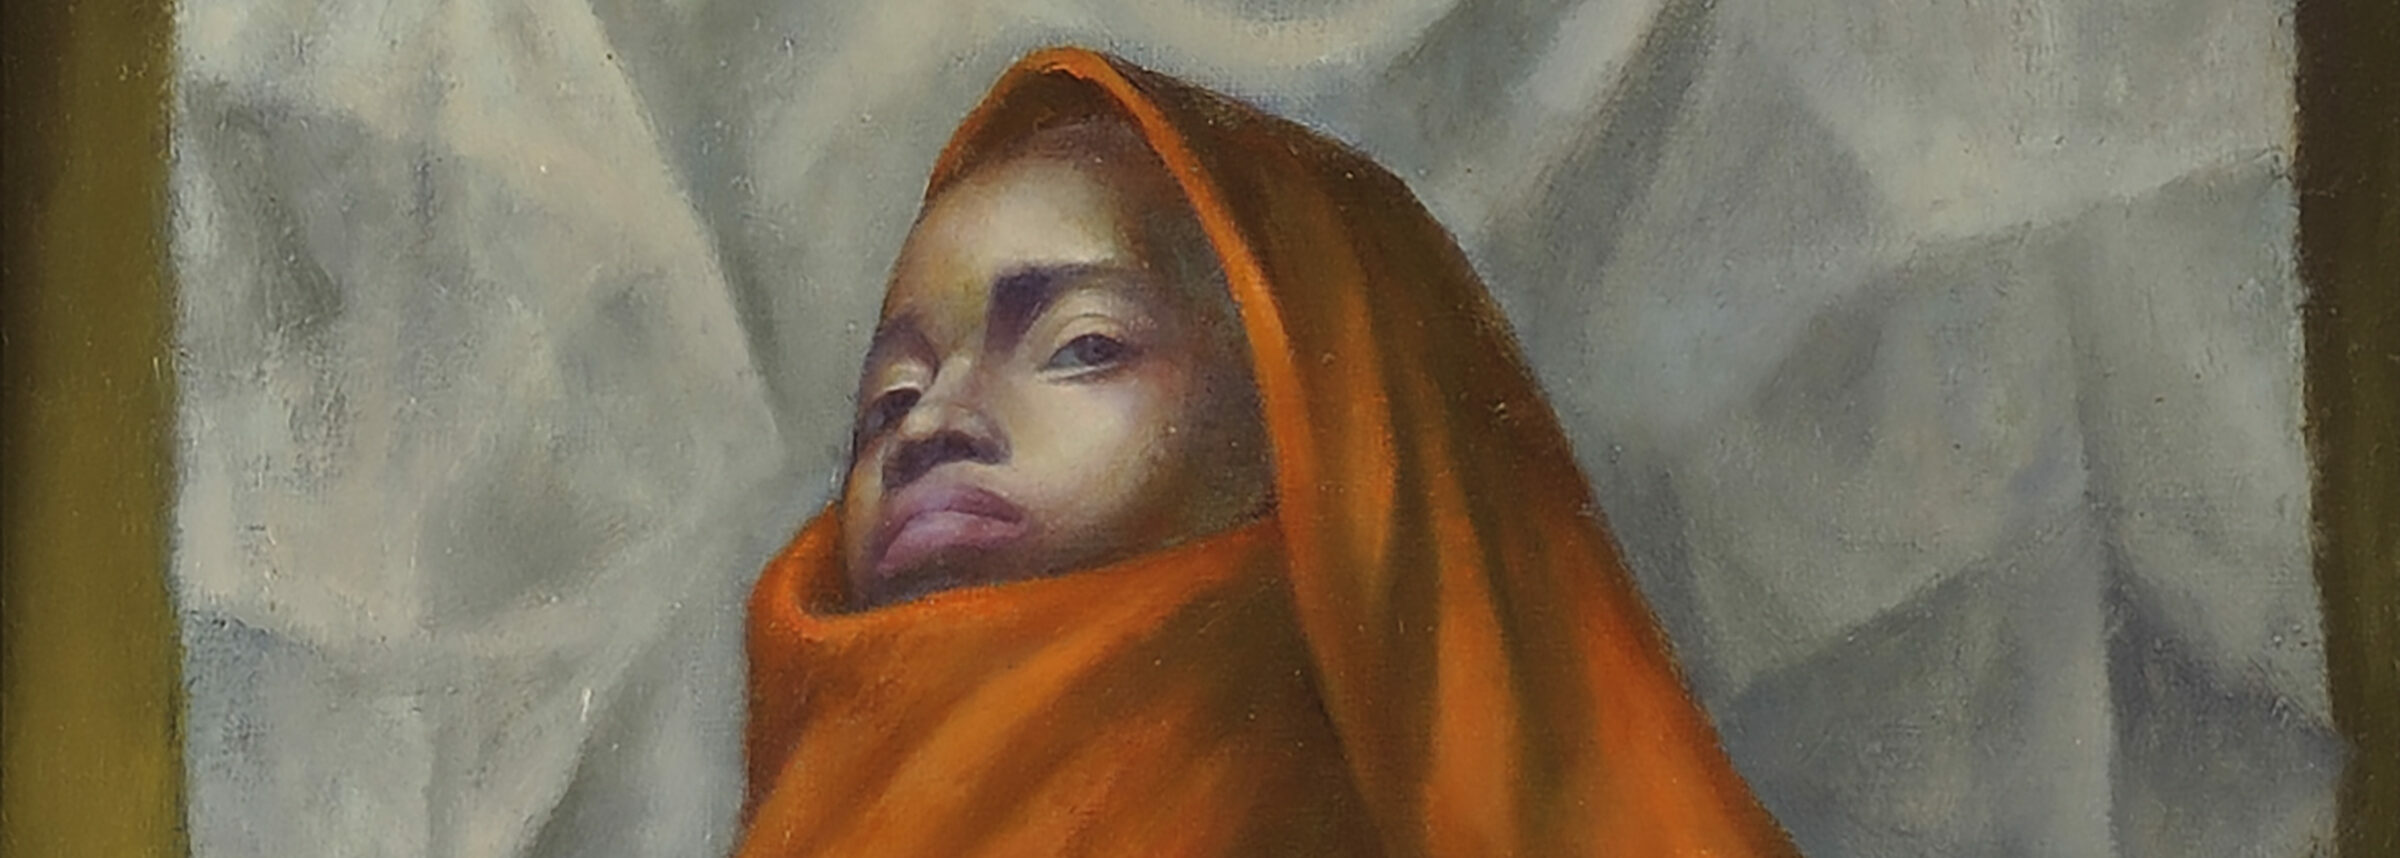 A Painting Of A Woman By Charles White.